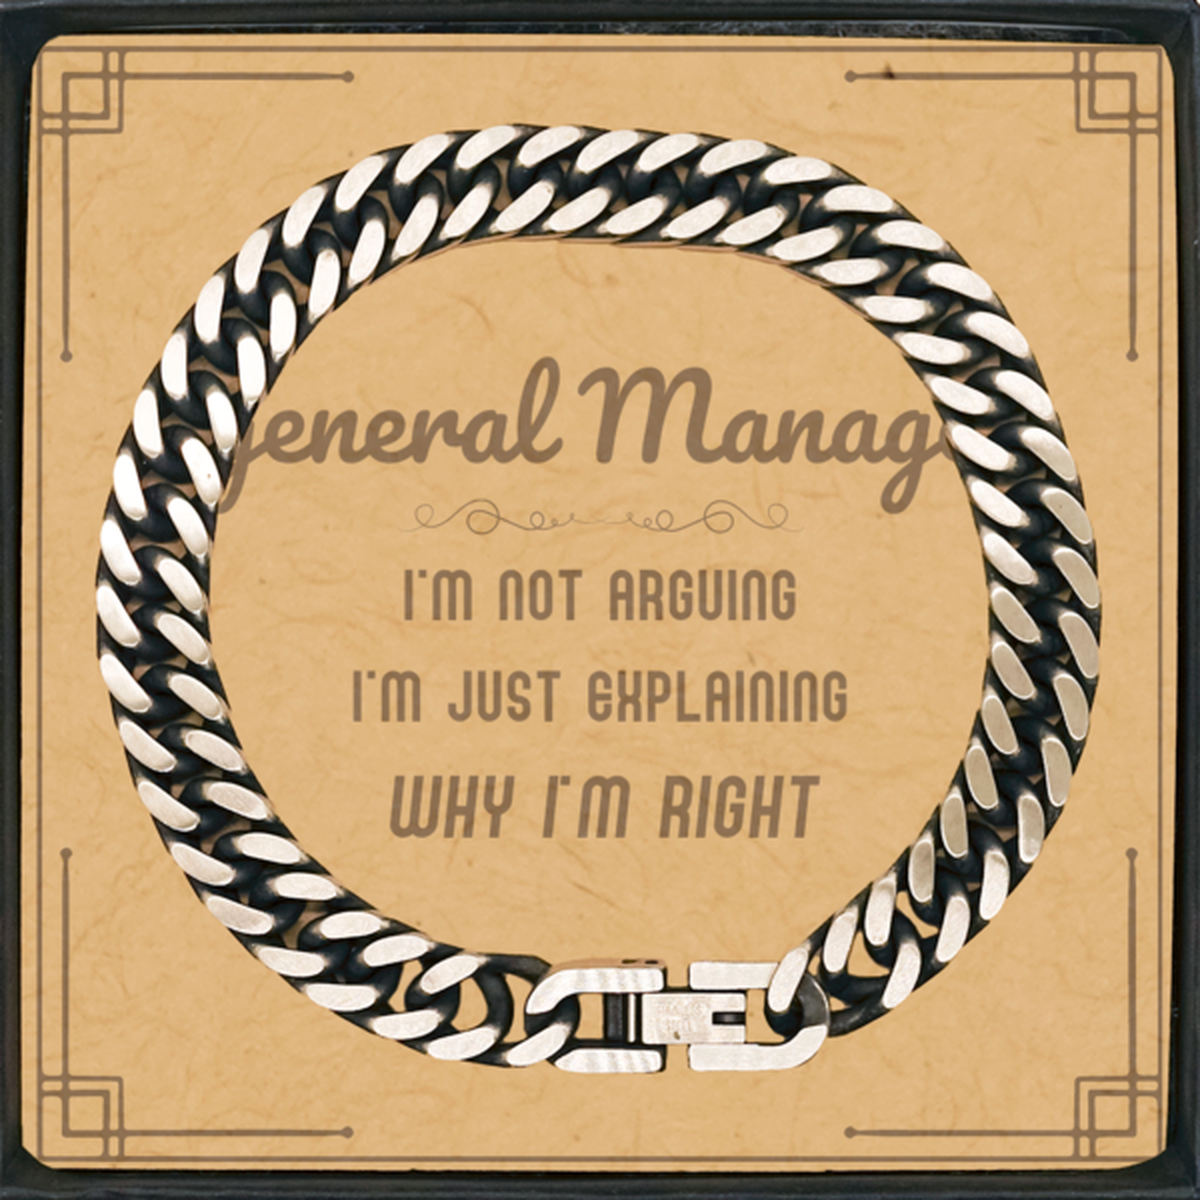 General Manager I'm not Arguing. I'm Just Explaining Why I'm RIGHT Cuban Link Chain Bracelet, Funny Saying Quote General Manager Gifts For General Manager Message Card Graduation Birthday Christmas Gifts for Men Women Coworker